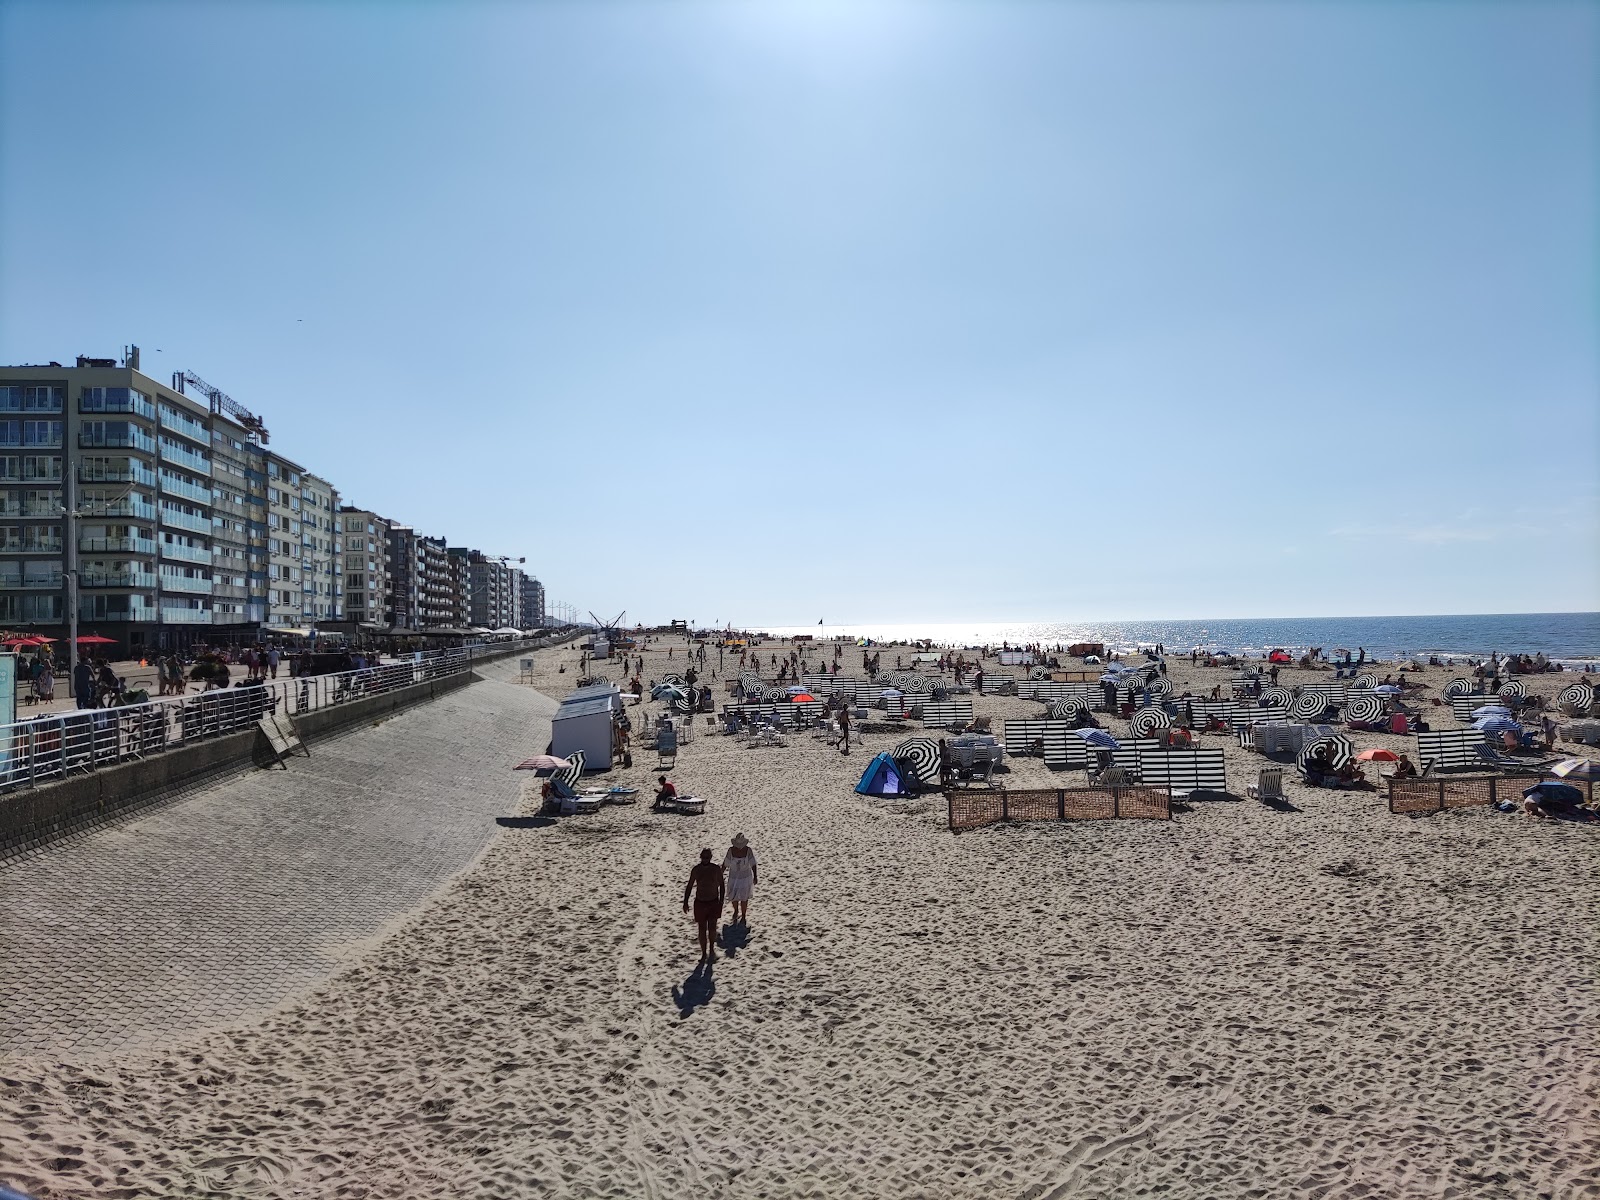 Photo of De Panne Strand with bright sand surface